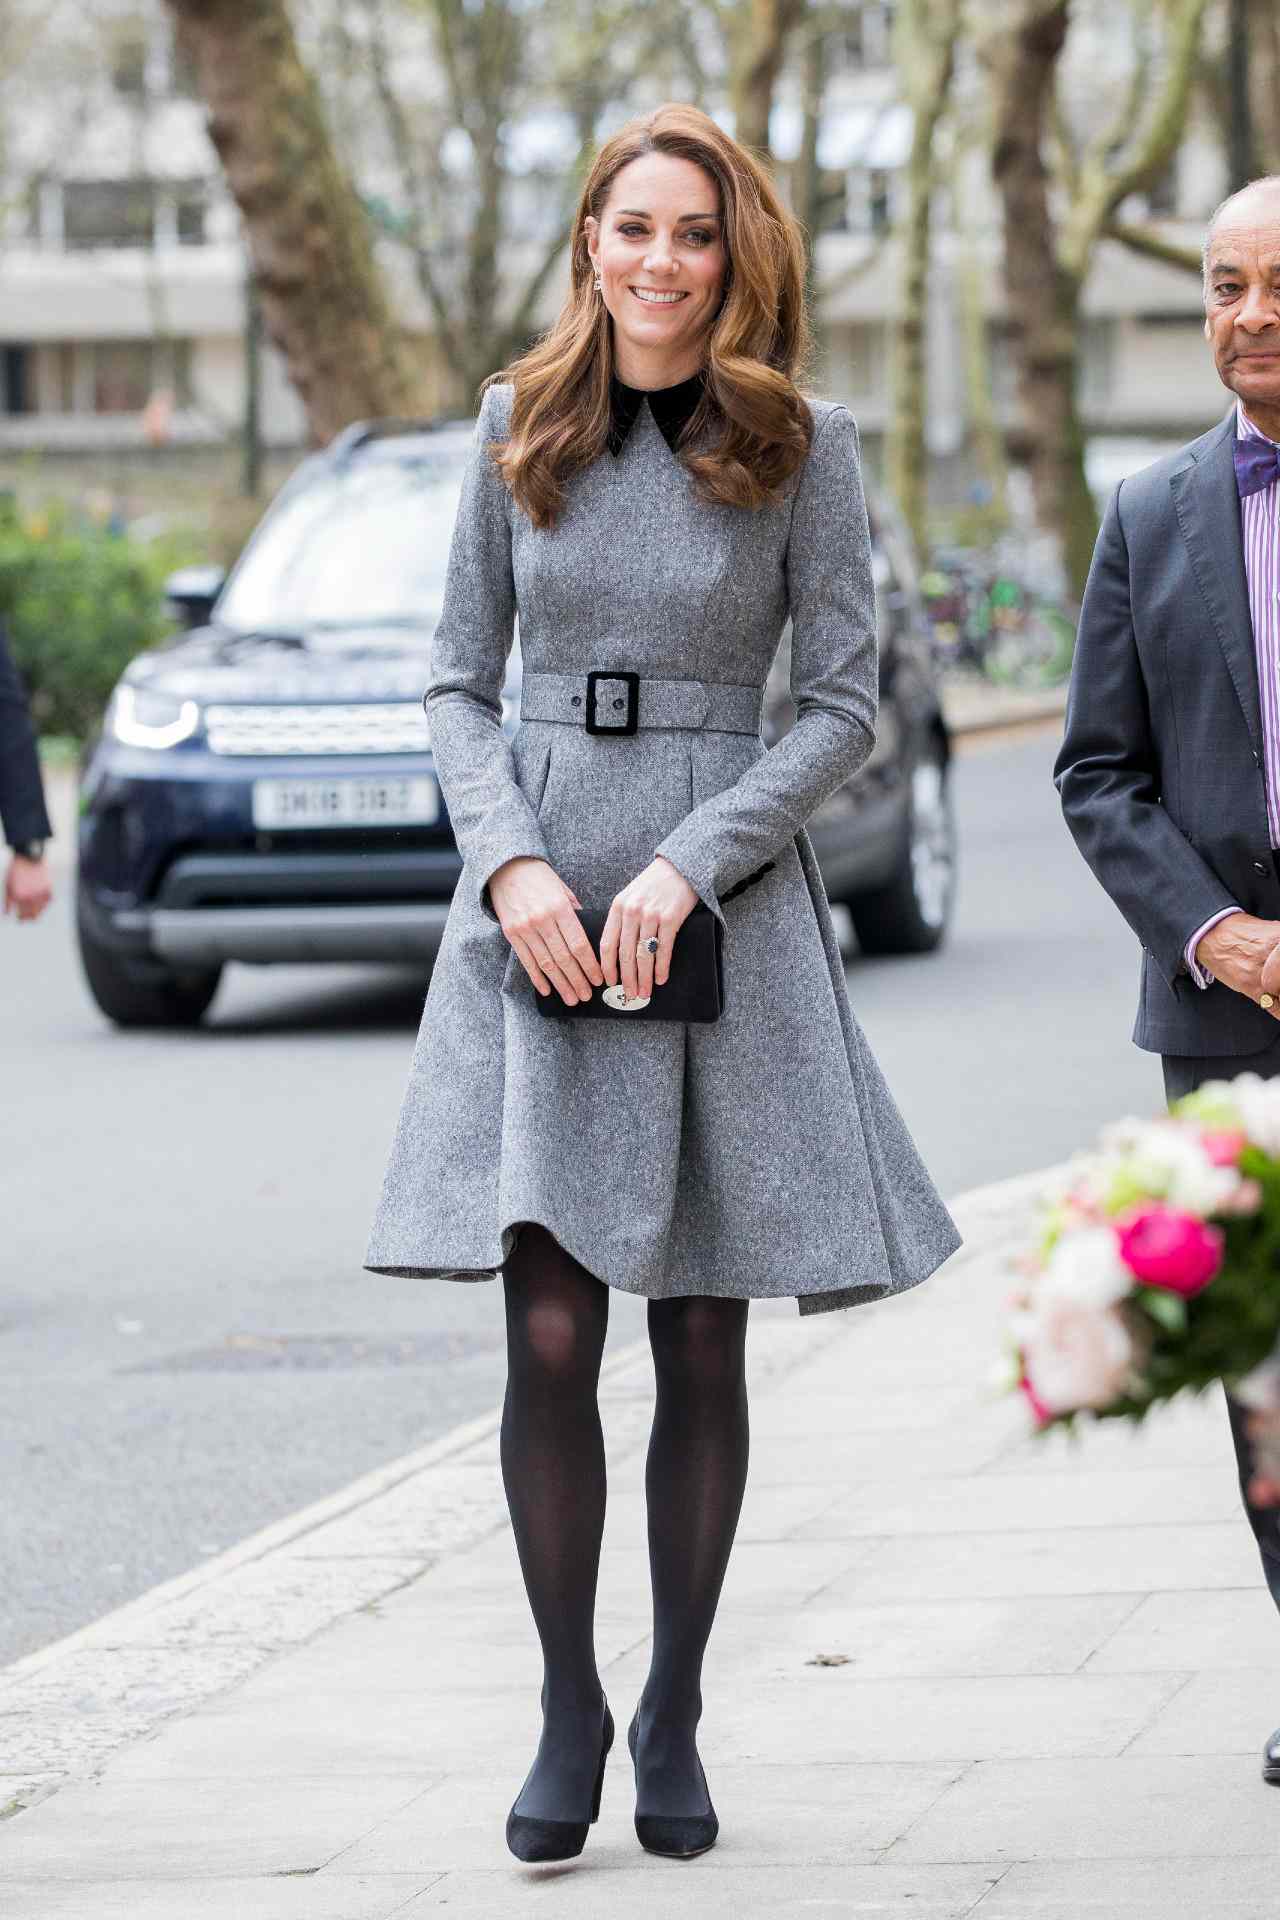 Kate Middleton in a belted, collared gray wool dress